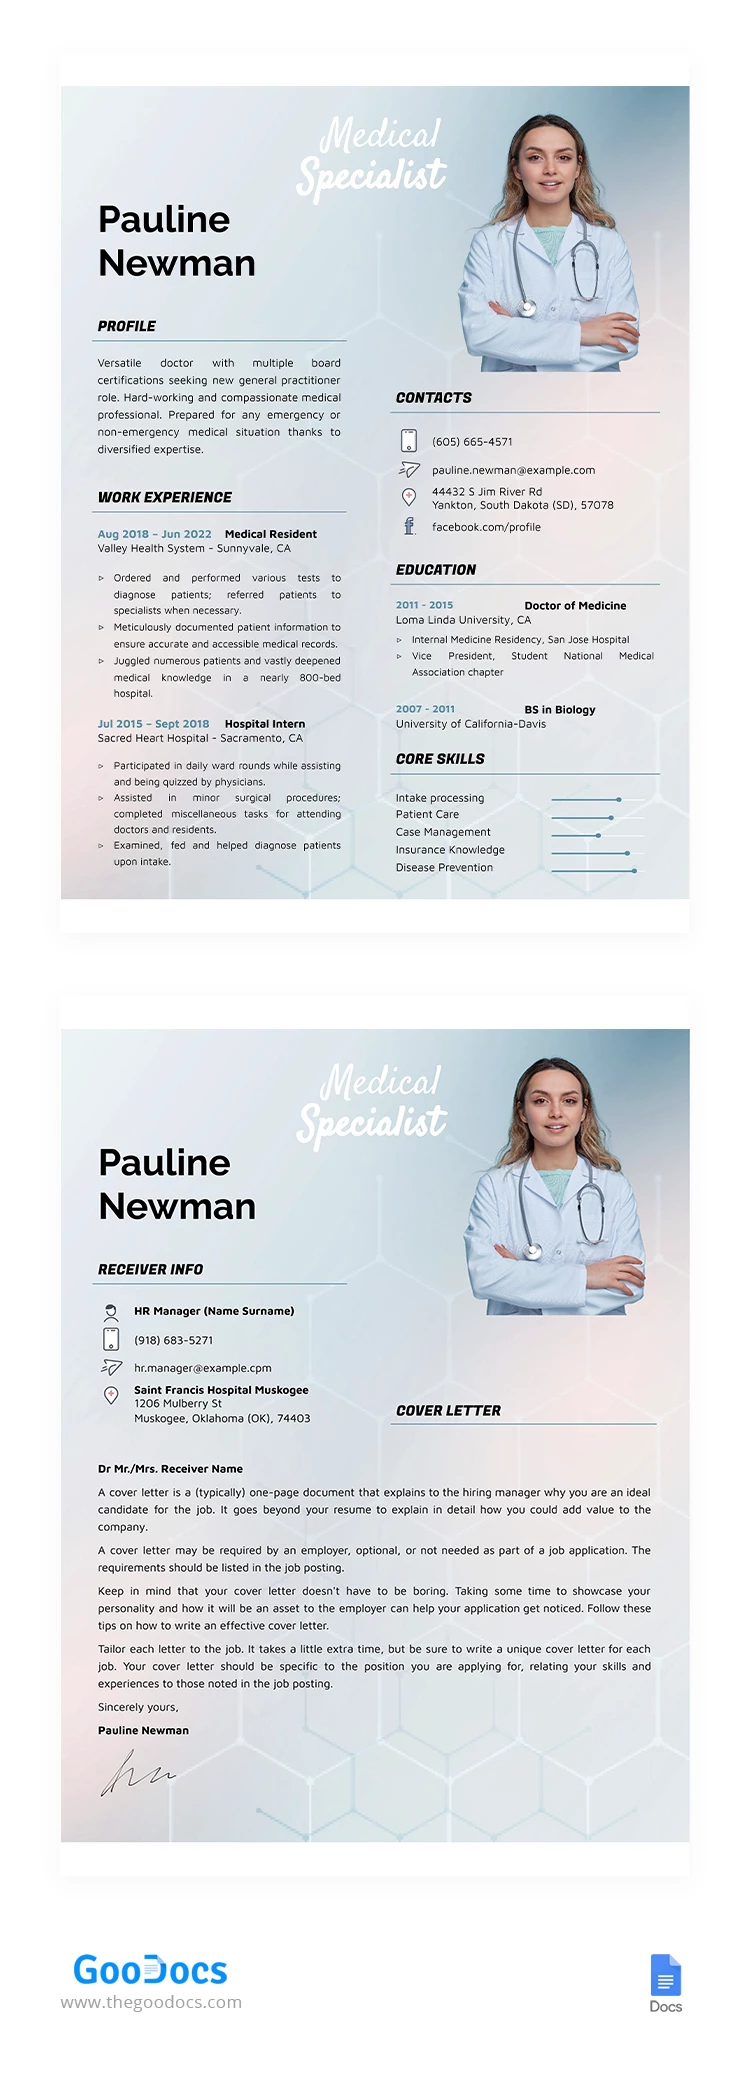 Medical CV with Cover Letter - free Google Docs Template - 10064519